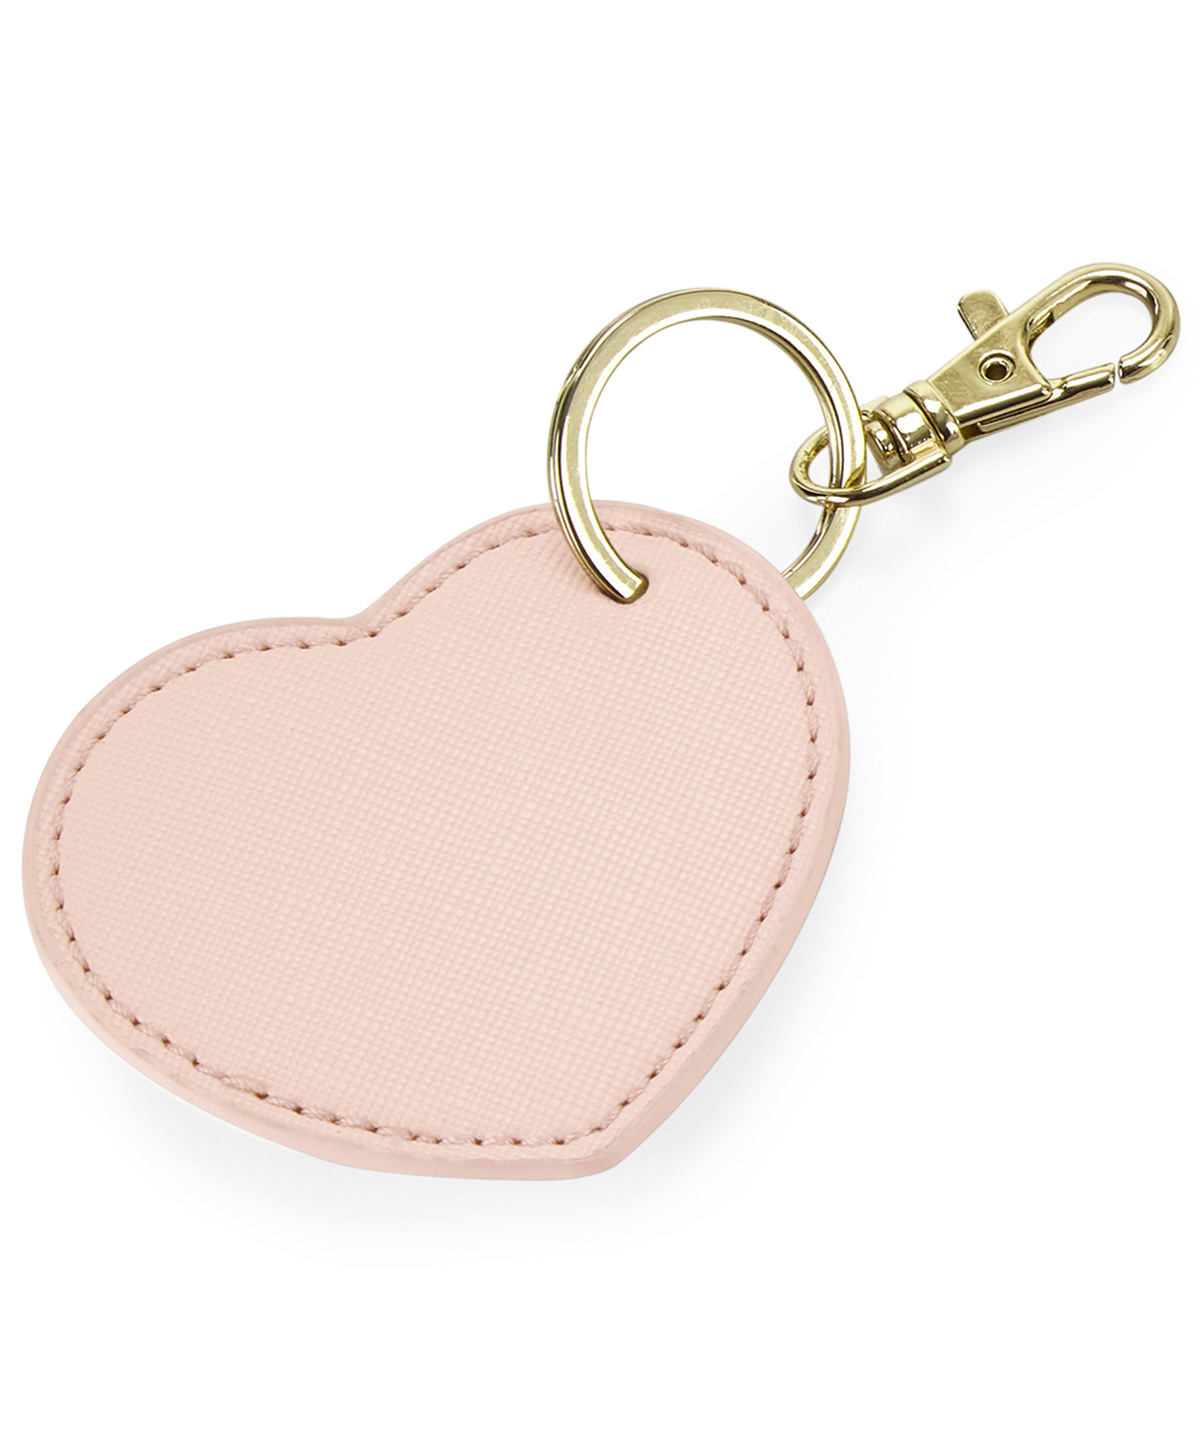 Boutique Heart Keyclip Soft Pink Size One Size